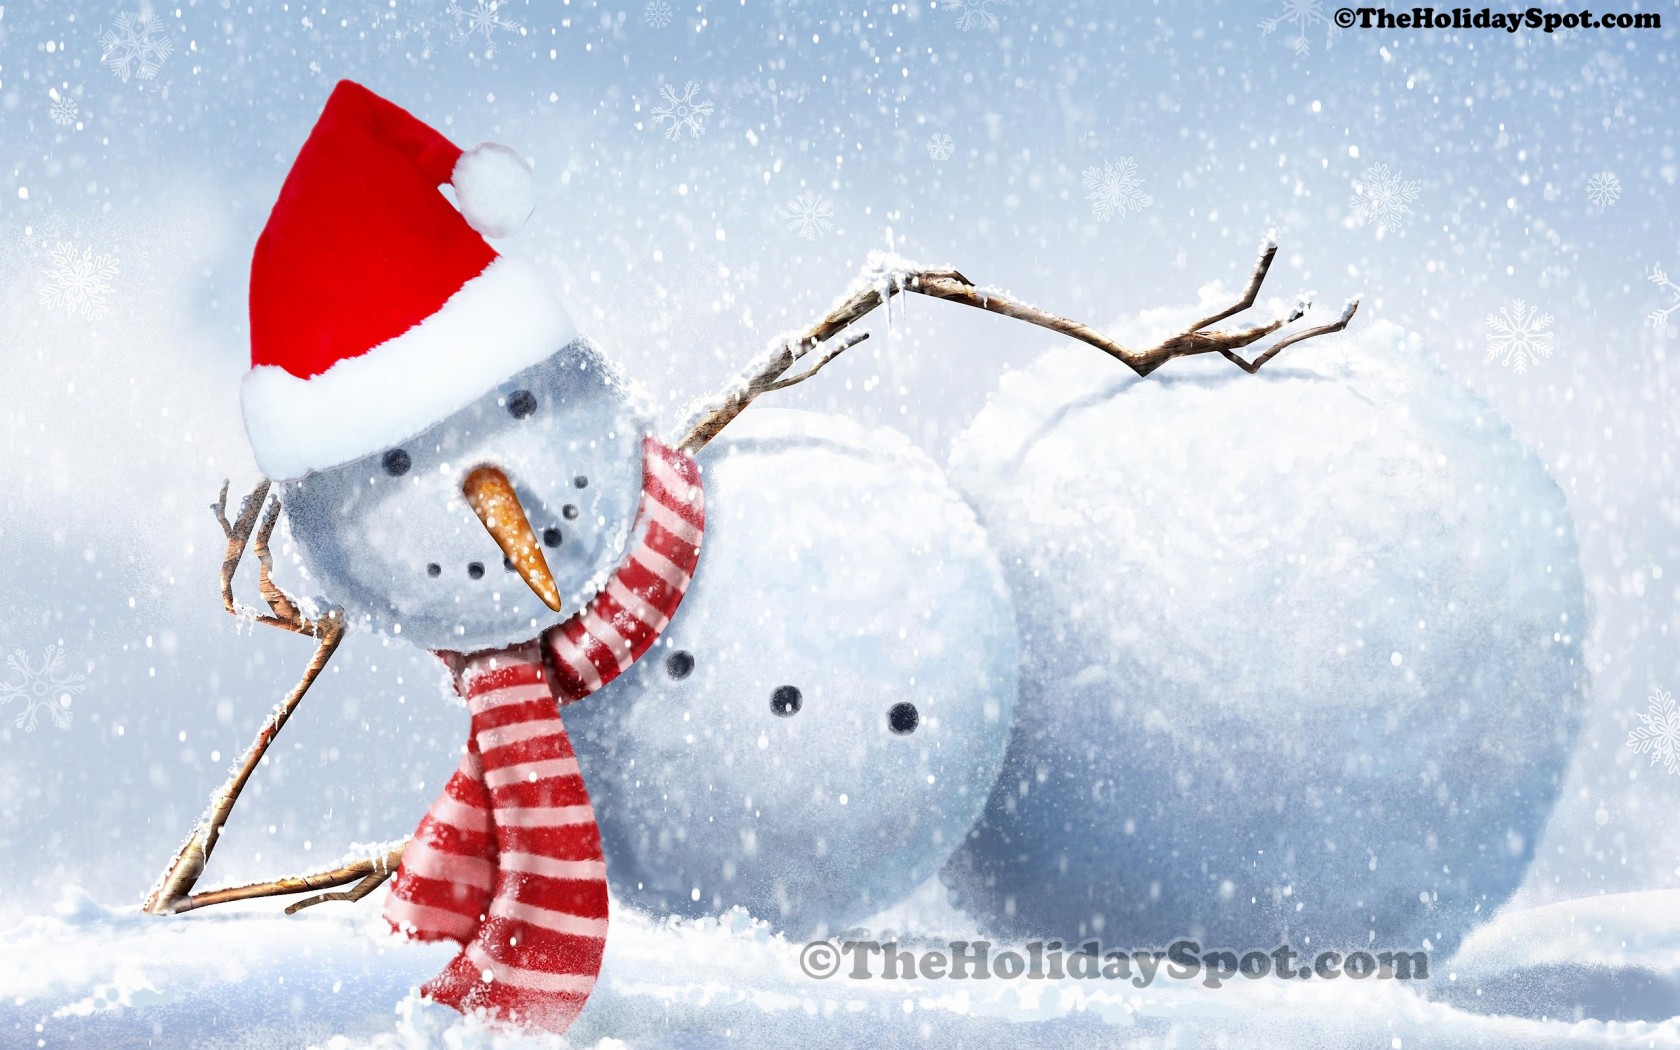 Snowman Wallpaper Or Right Click The Image To Save Set As Desktop